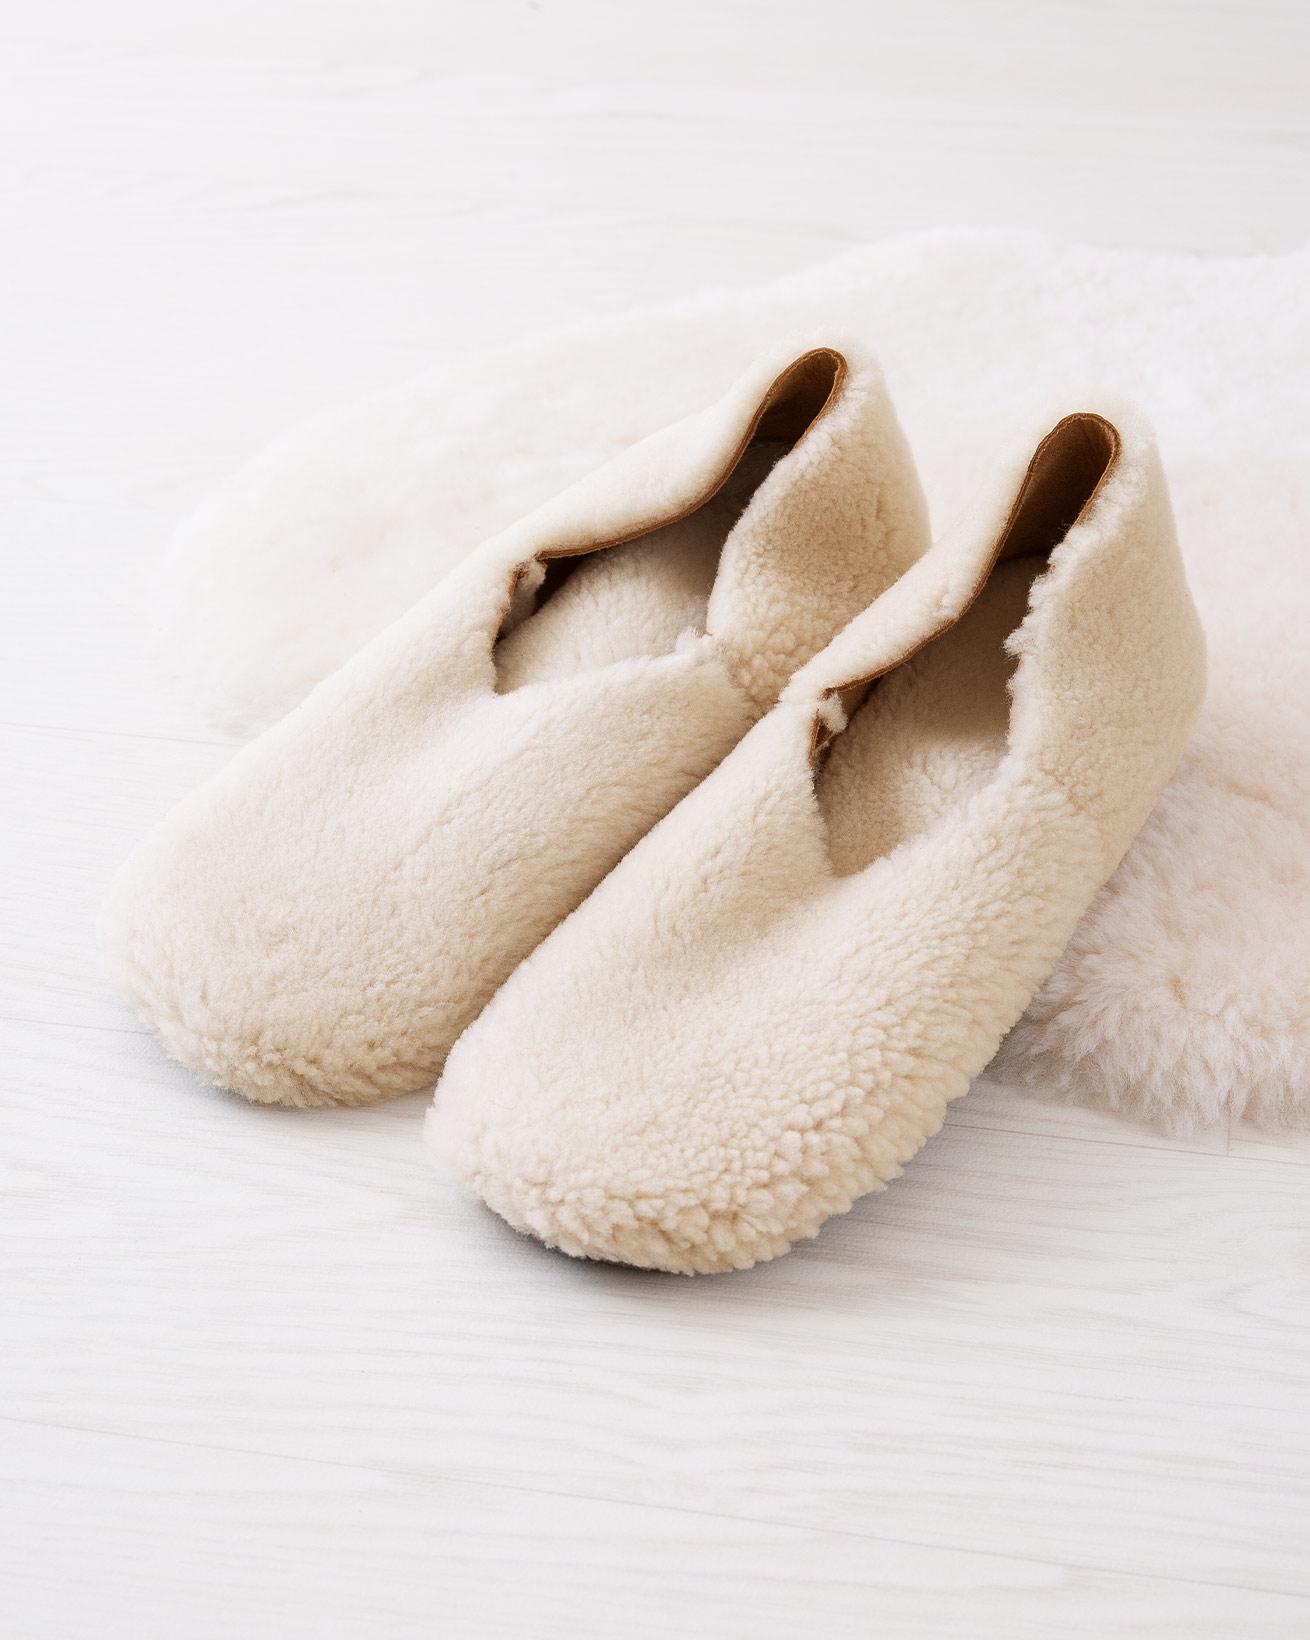 snoozies house slippers